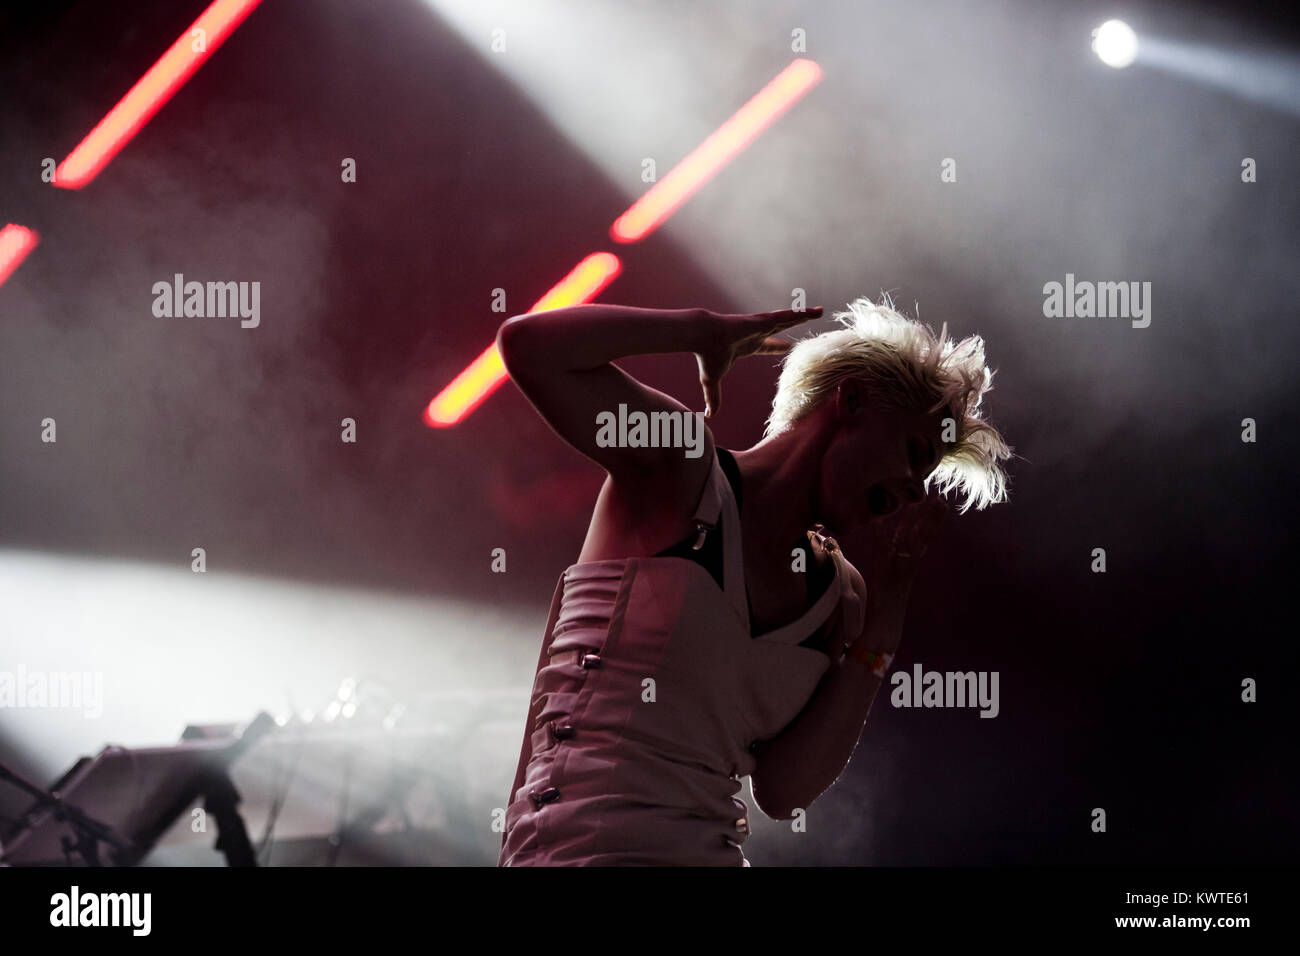 The Swedish singer Robyn (Miriam Carlsson) performs live concert at Roskilde Festival 2010 and is here pictured live on stage during her show. Denmark 04/07 2010. Stock Photo